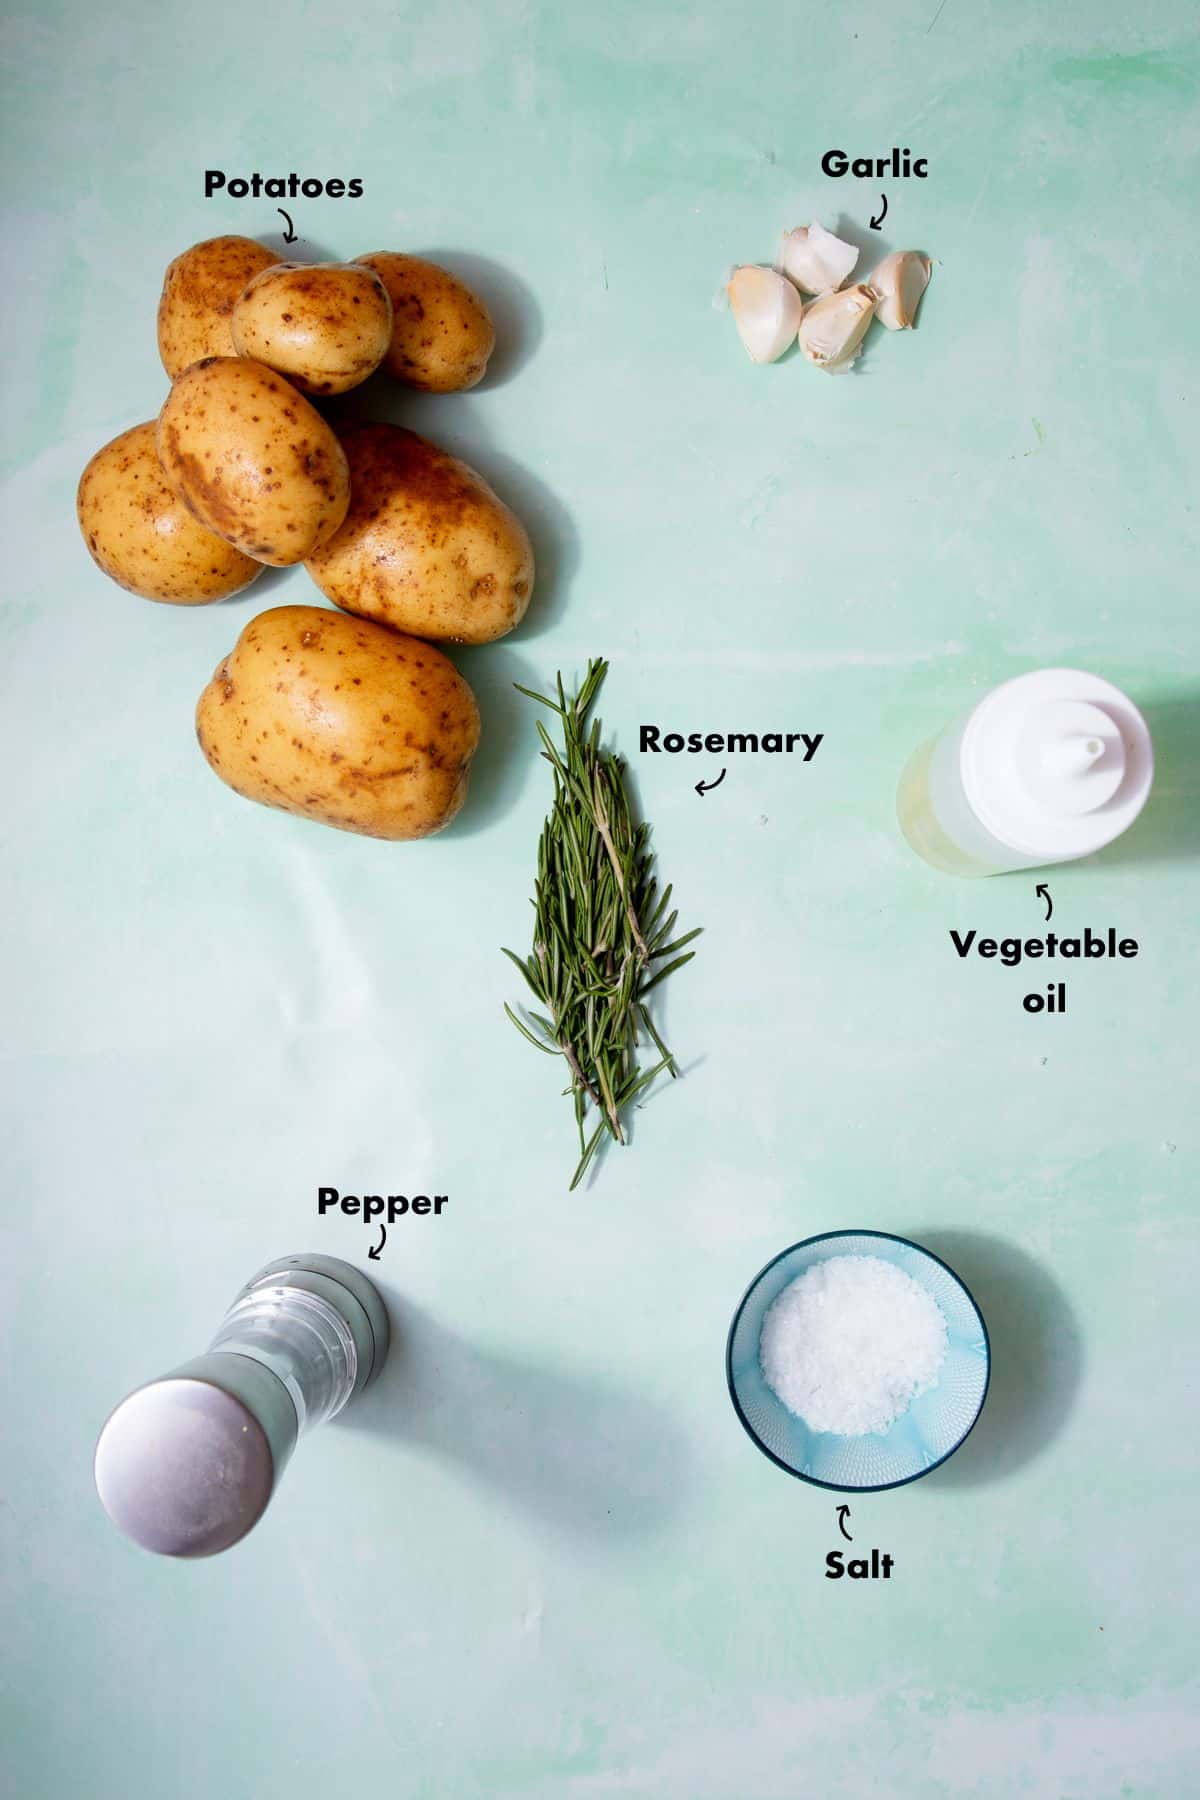 Ingredients to make the parmentier potatoes laid out on a plae blue background and labelled.